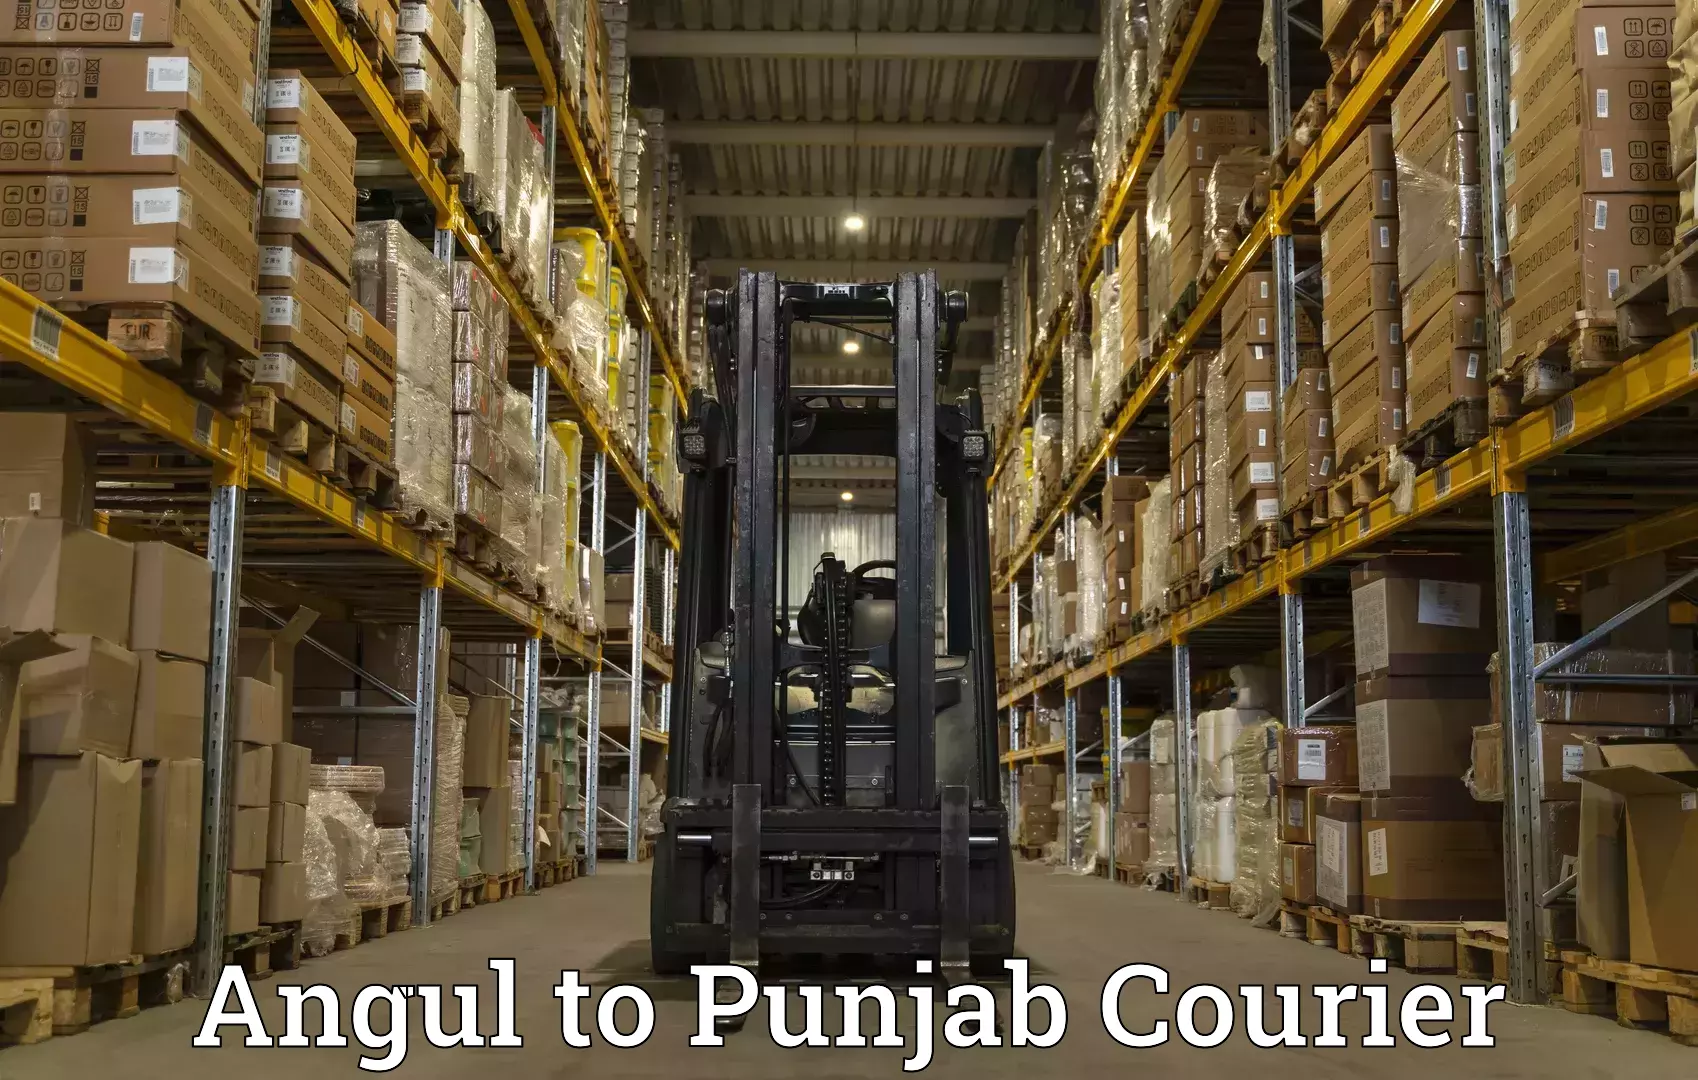 Express delivery capabilities Angul to Pathankot